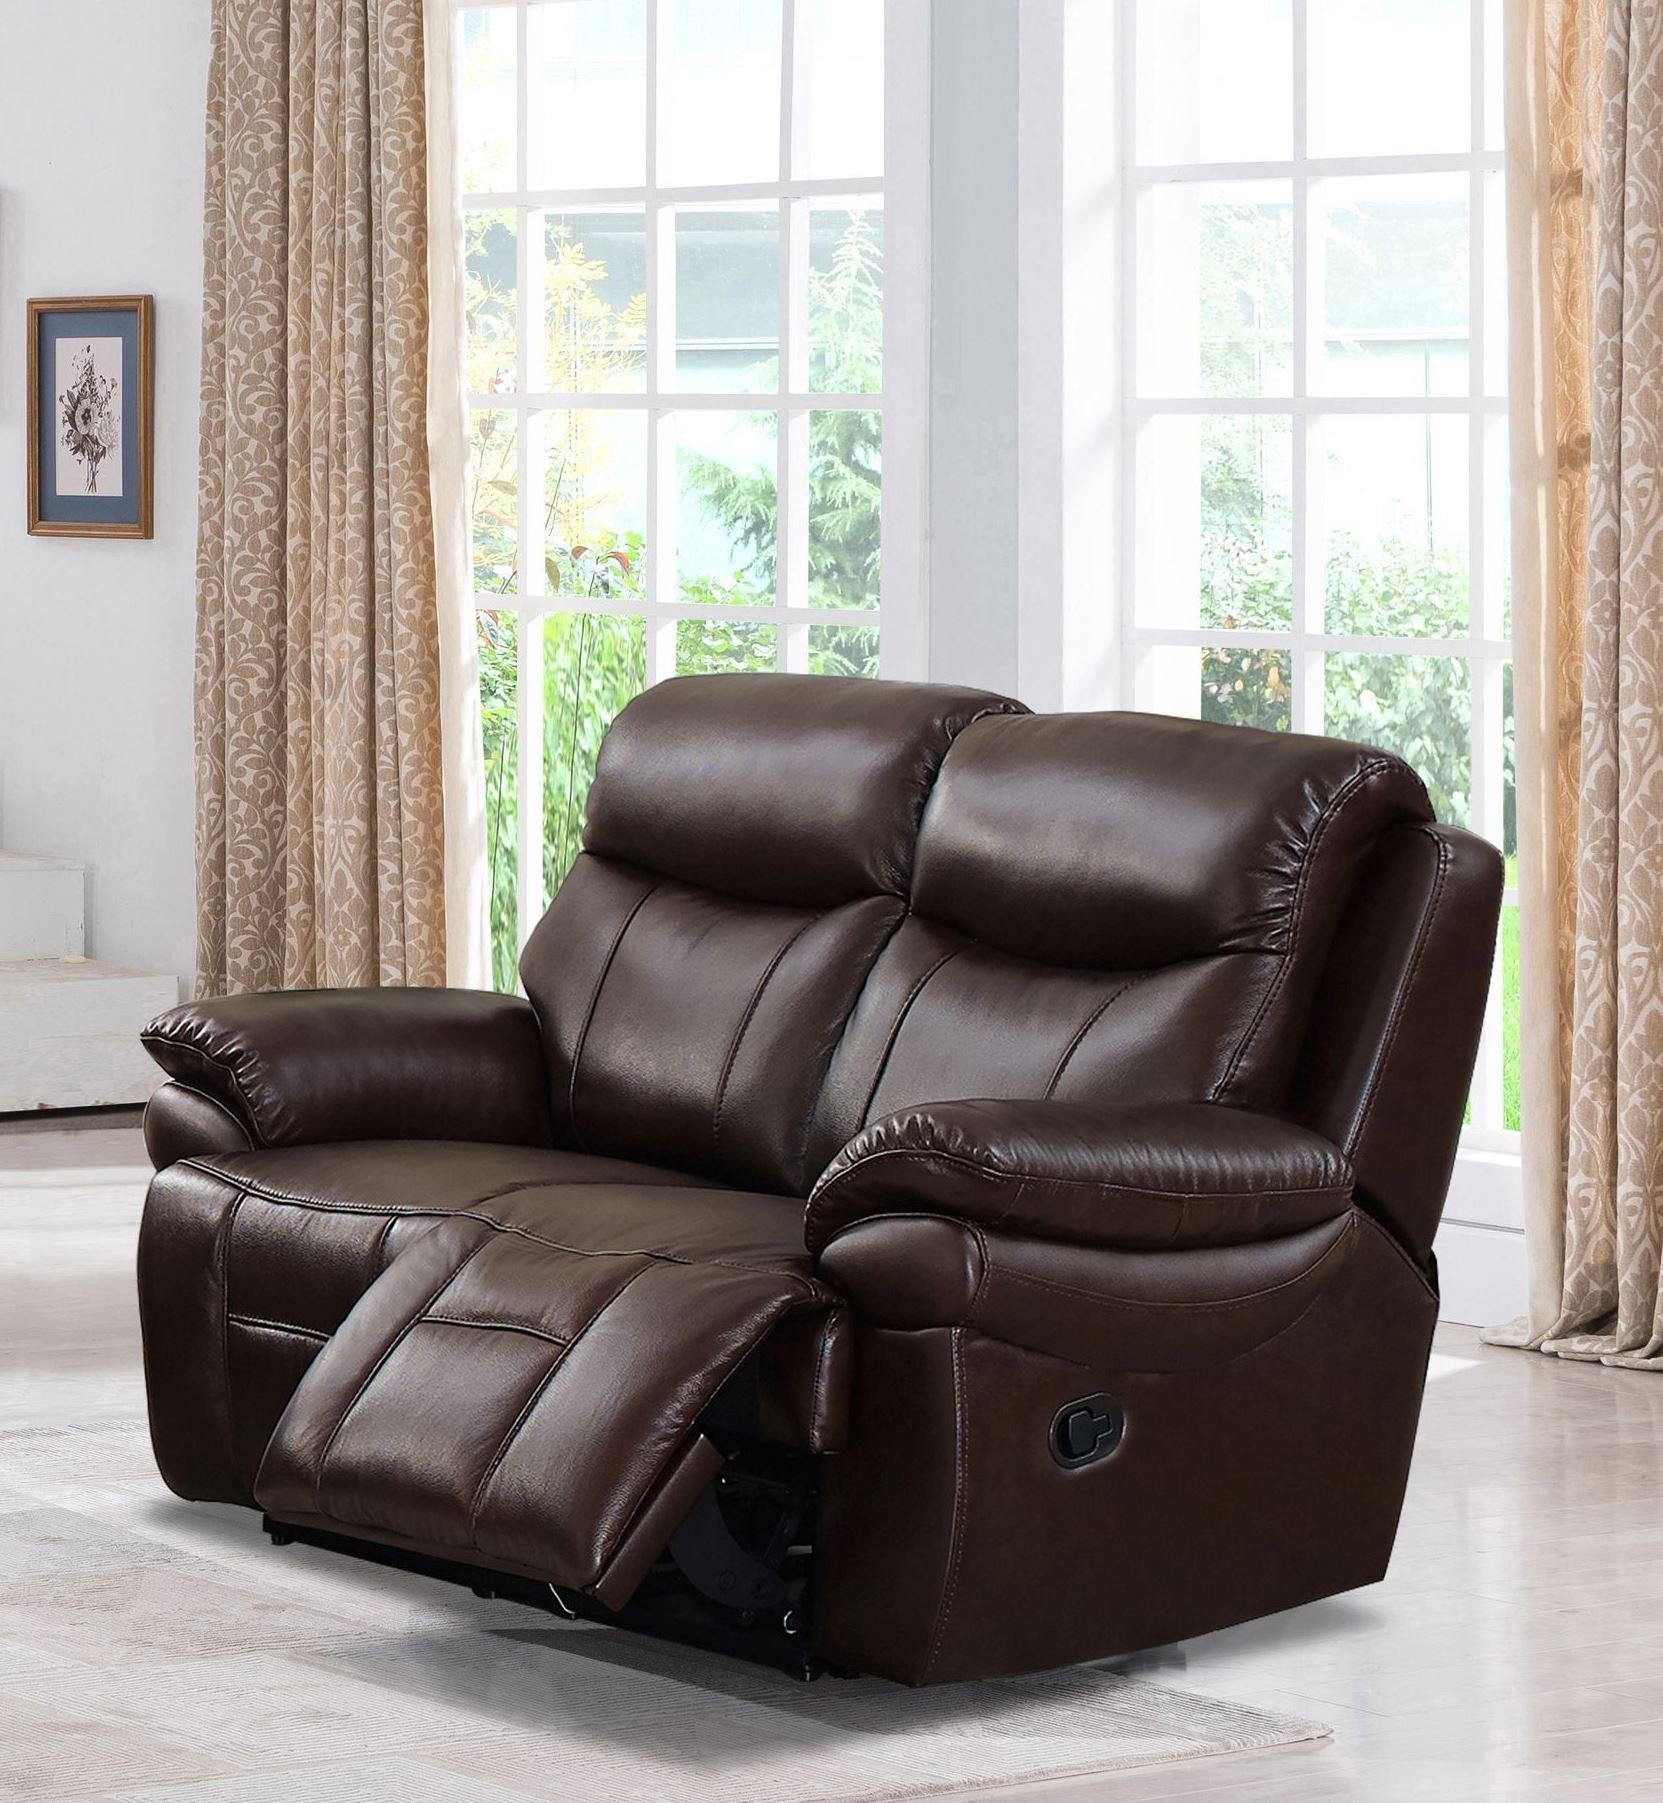 Hydeline Fraser Brown Top Grain Leather Reclining Loveseat From Amax Regarding Top Grain Leather Loveseats (View 6 of 20)